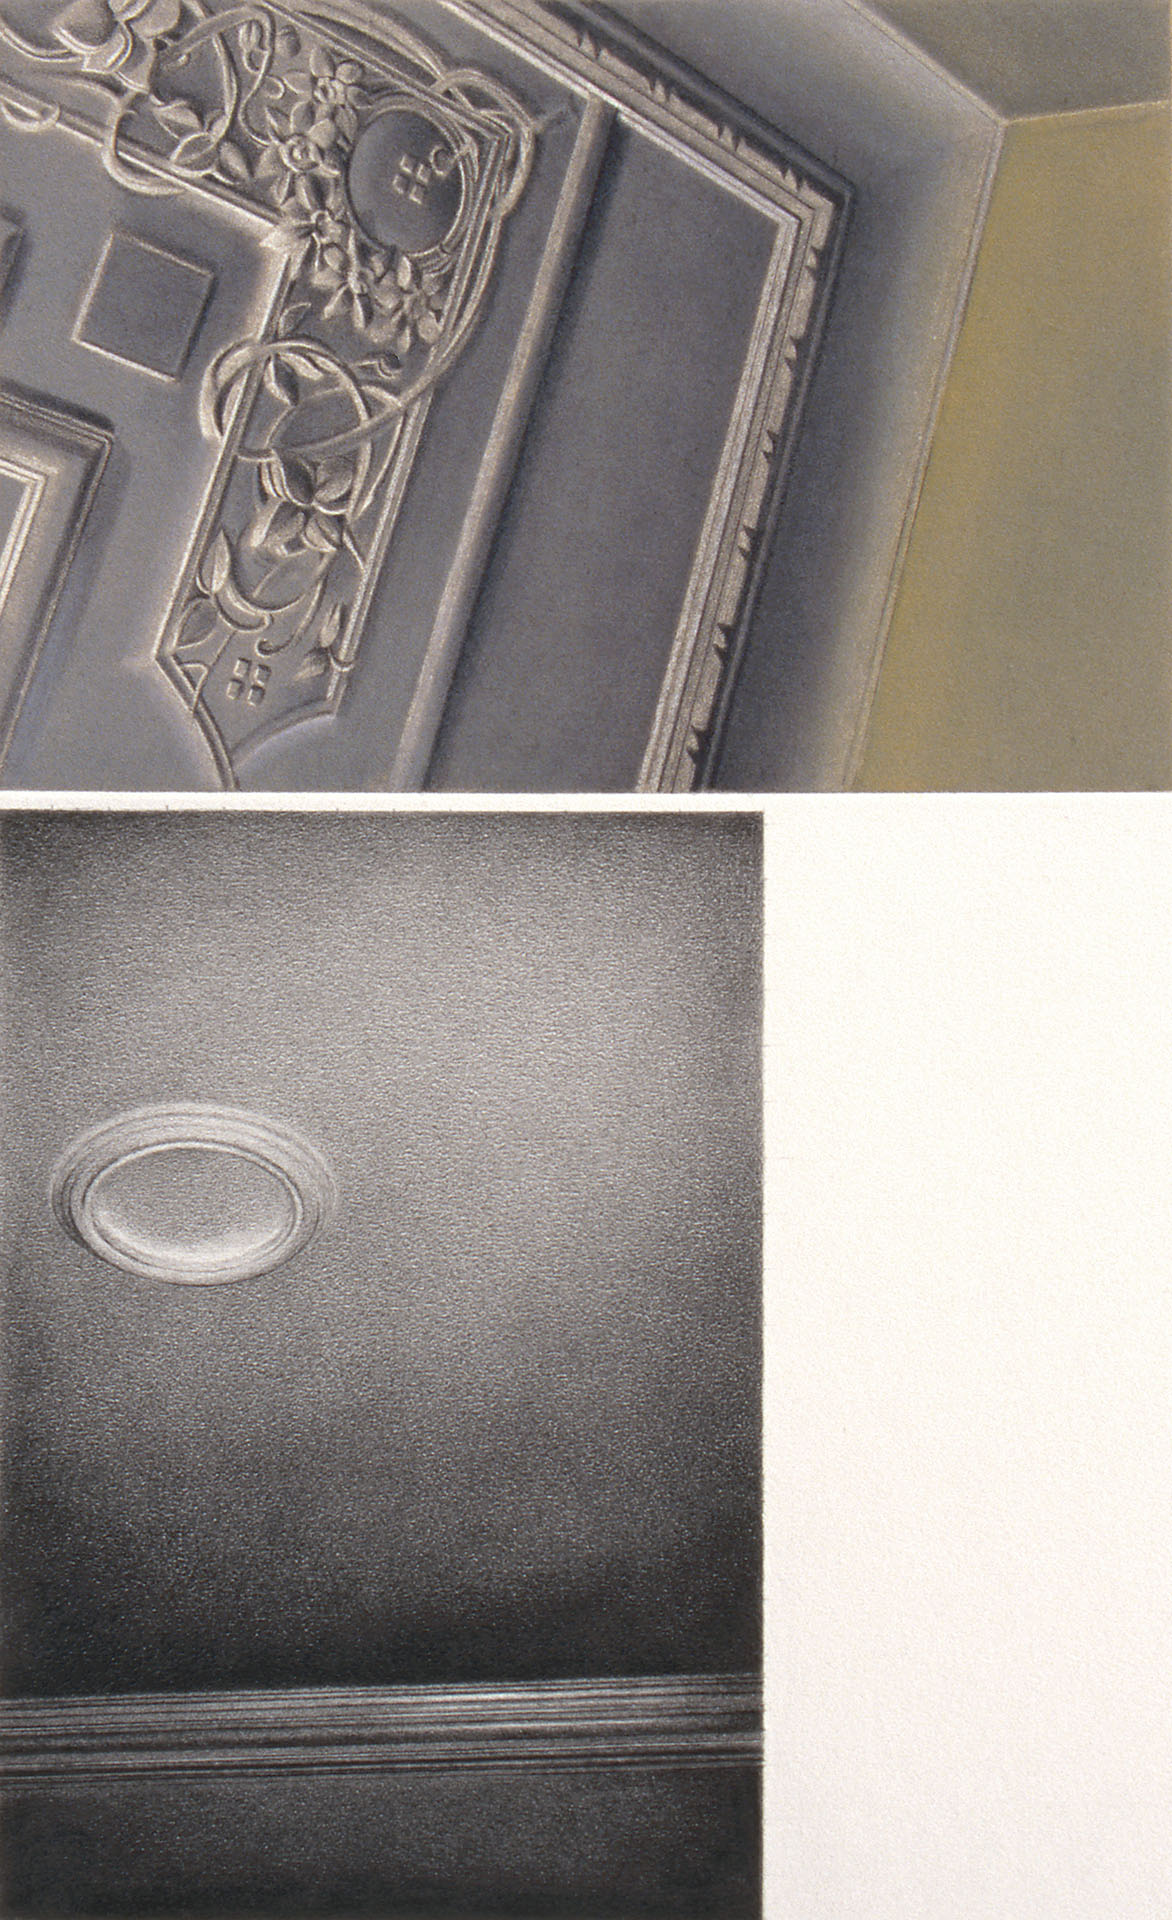  Cloud, 2003, burnished aquatint, pastel, carbon & graphite, 350 x 200mm, private collection 